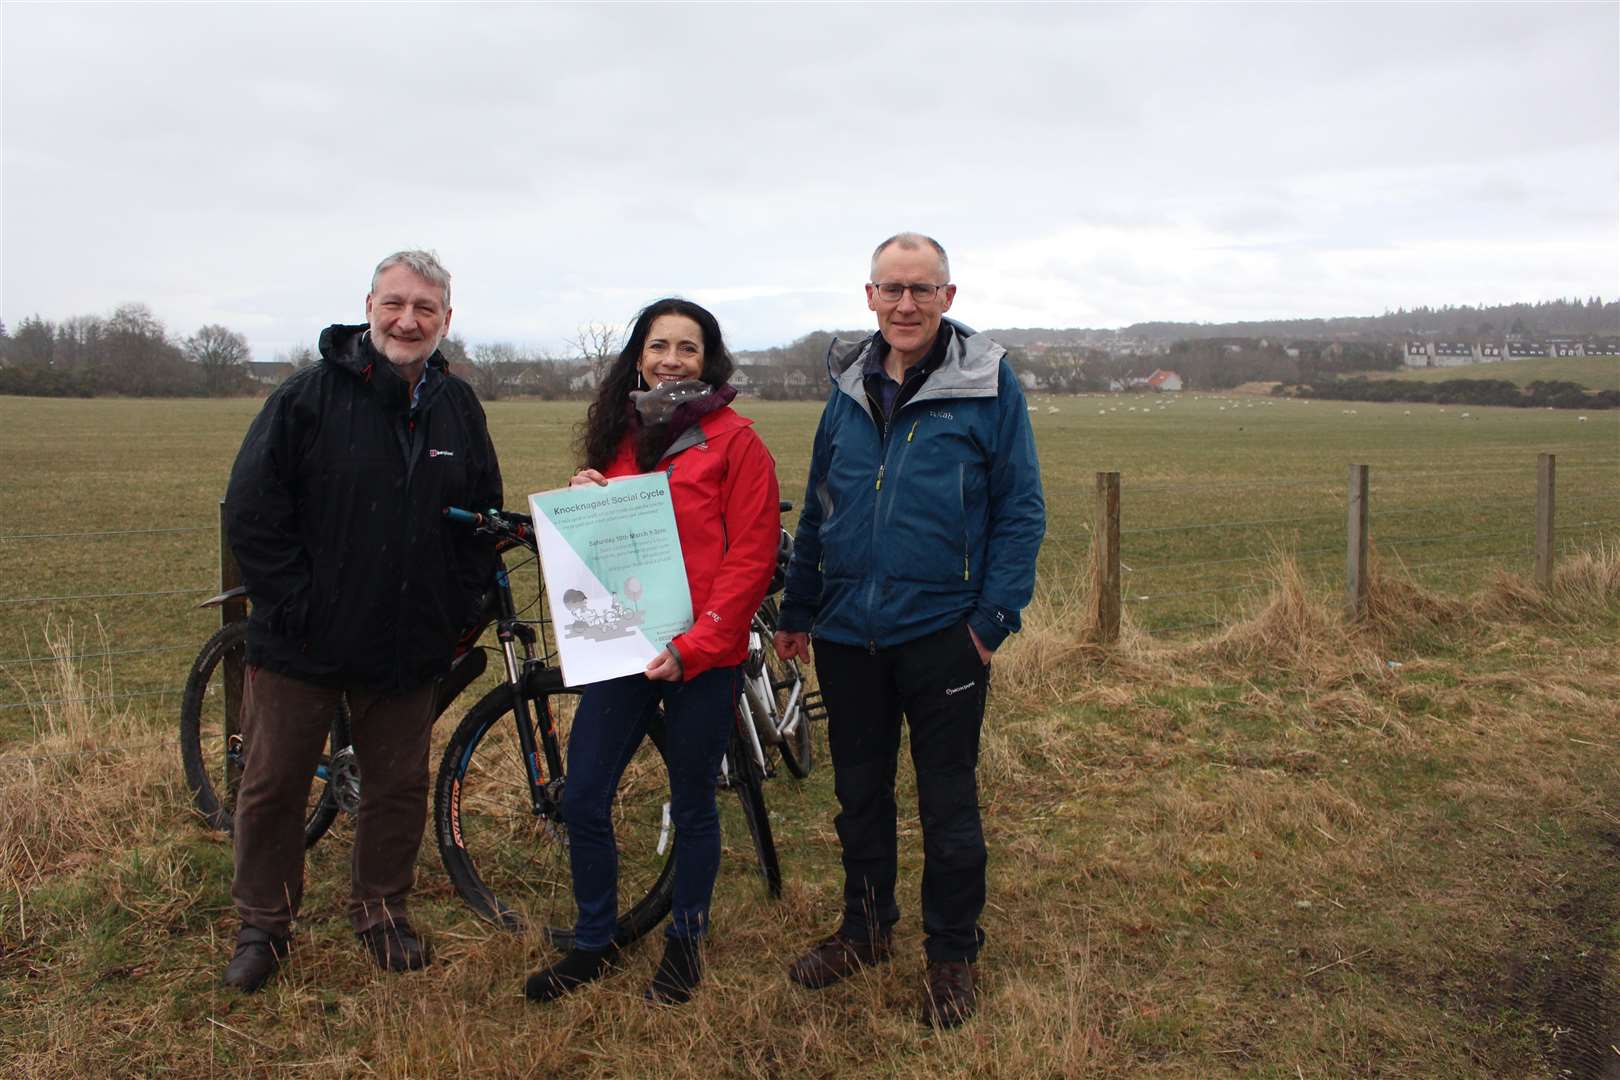 Knocknagael Ltd plans to create a community space with allotments and growing spaces on the Smiddy Field at Inverness. From left: Steve Rowan, director; Maria de la Torre, chairwoman; and Ronald MacVicar, director. Picture: John Davidson